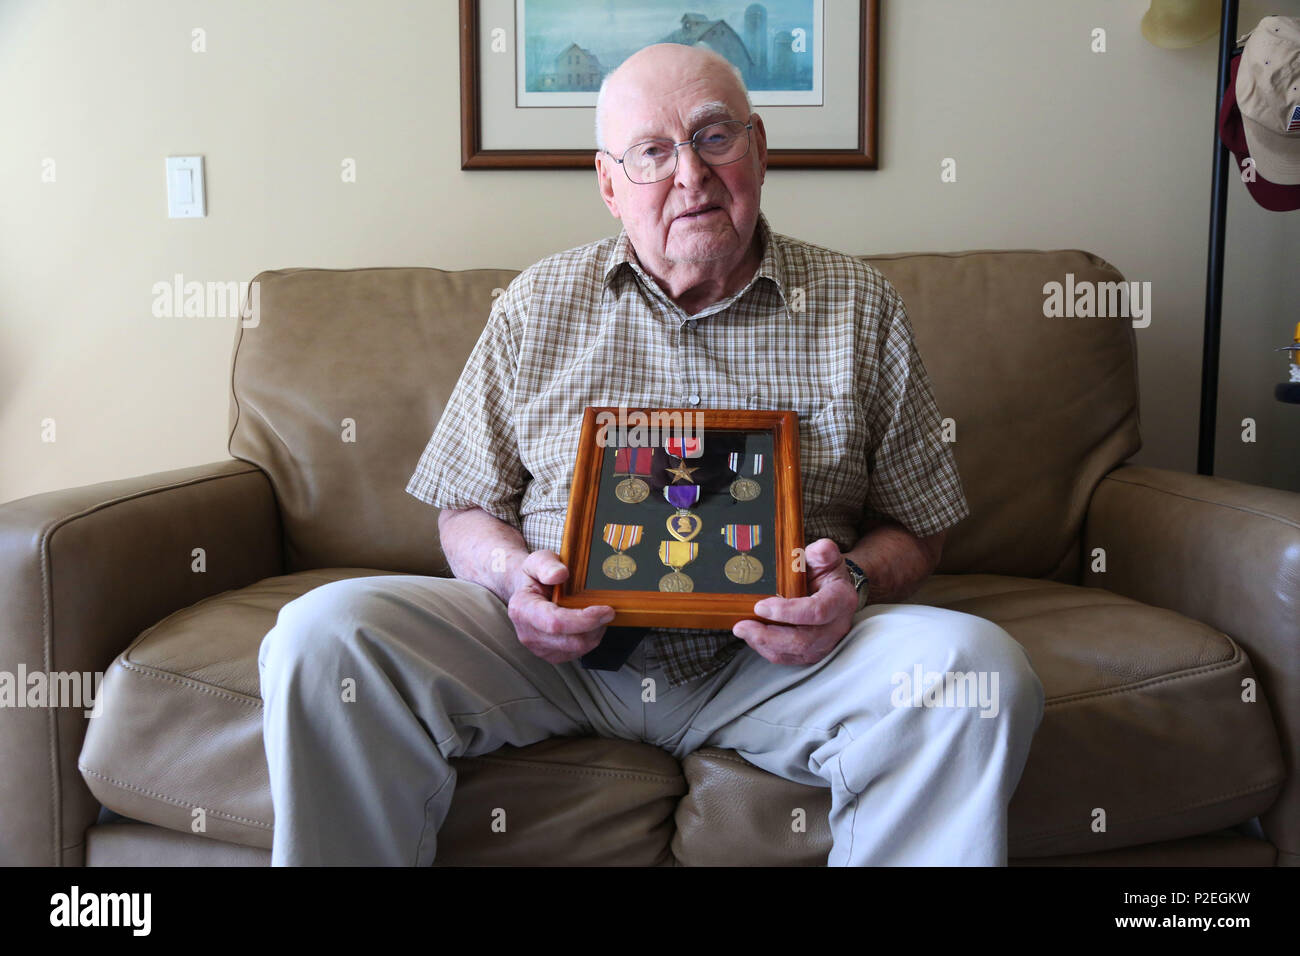 Former Marine Sgt. Warren Jorgenson, 96, holds the medals he was awarded during World War II, where he was taken by Japanese soldiers as a prisoner of war. Jorgenson spent years as prisoner before being liberated in September 1945. (U.S. Marine Corps photo by Cpl. Jennifer Webster/Released) Stock Photo